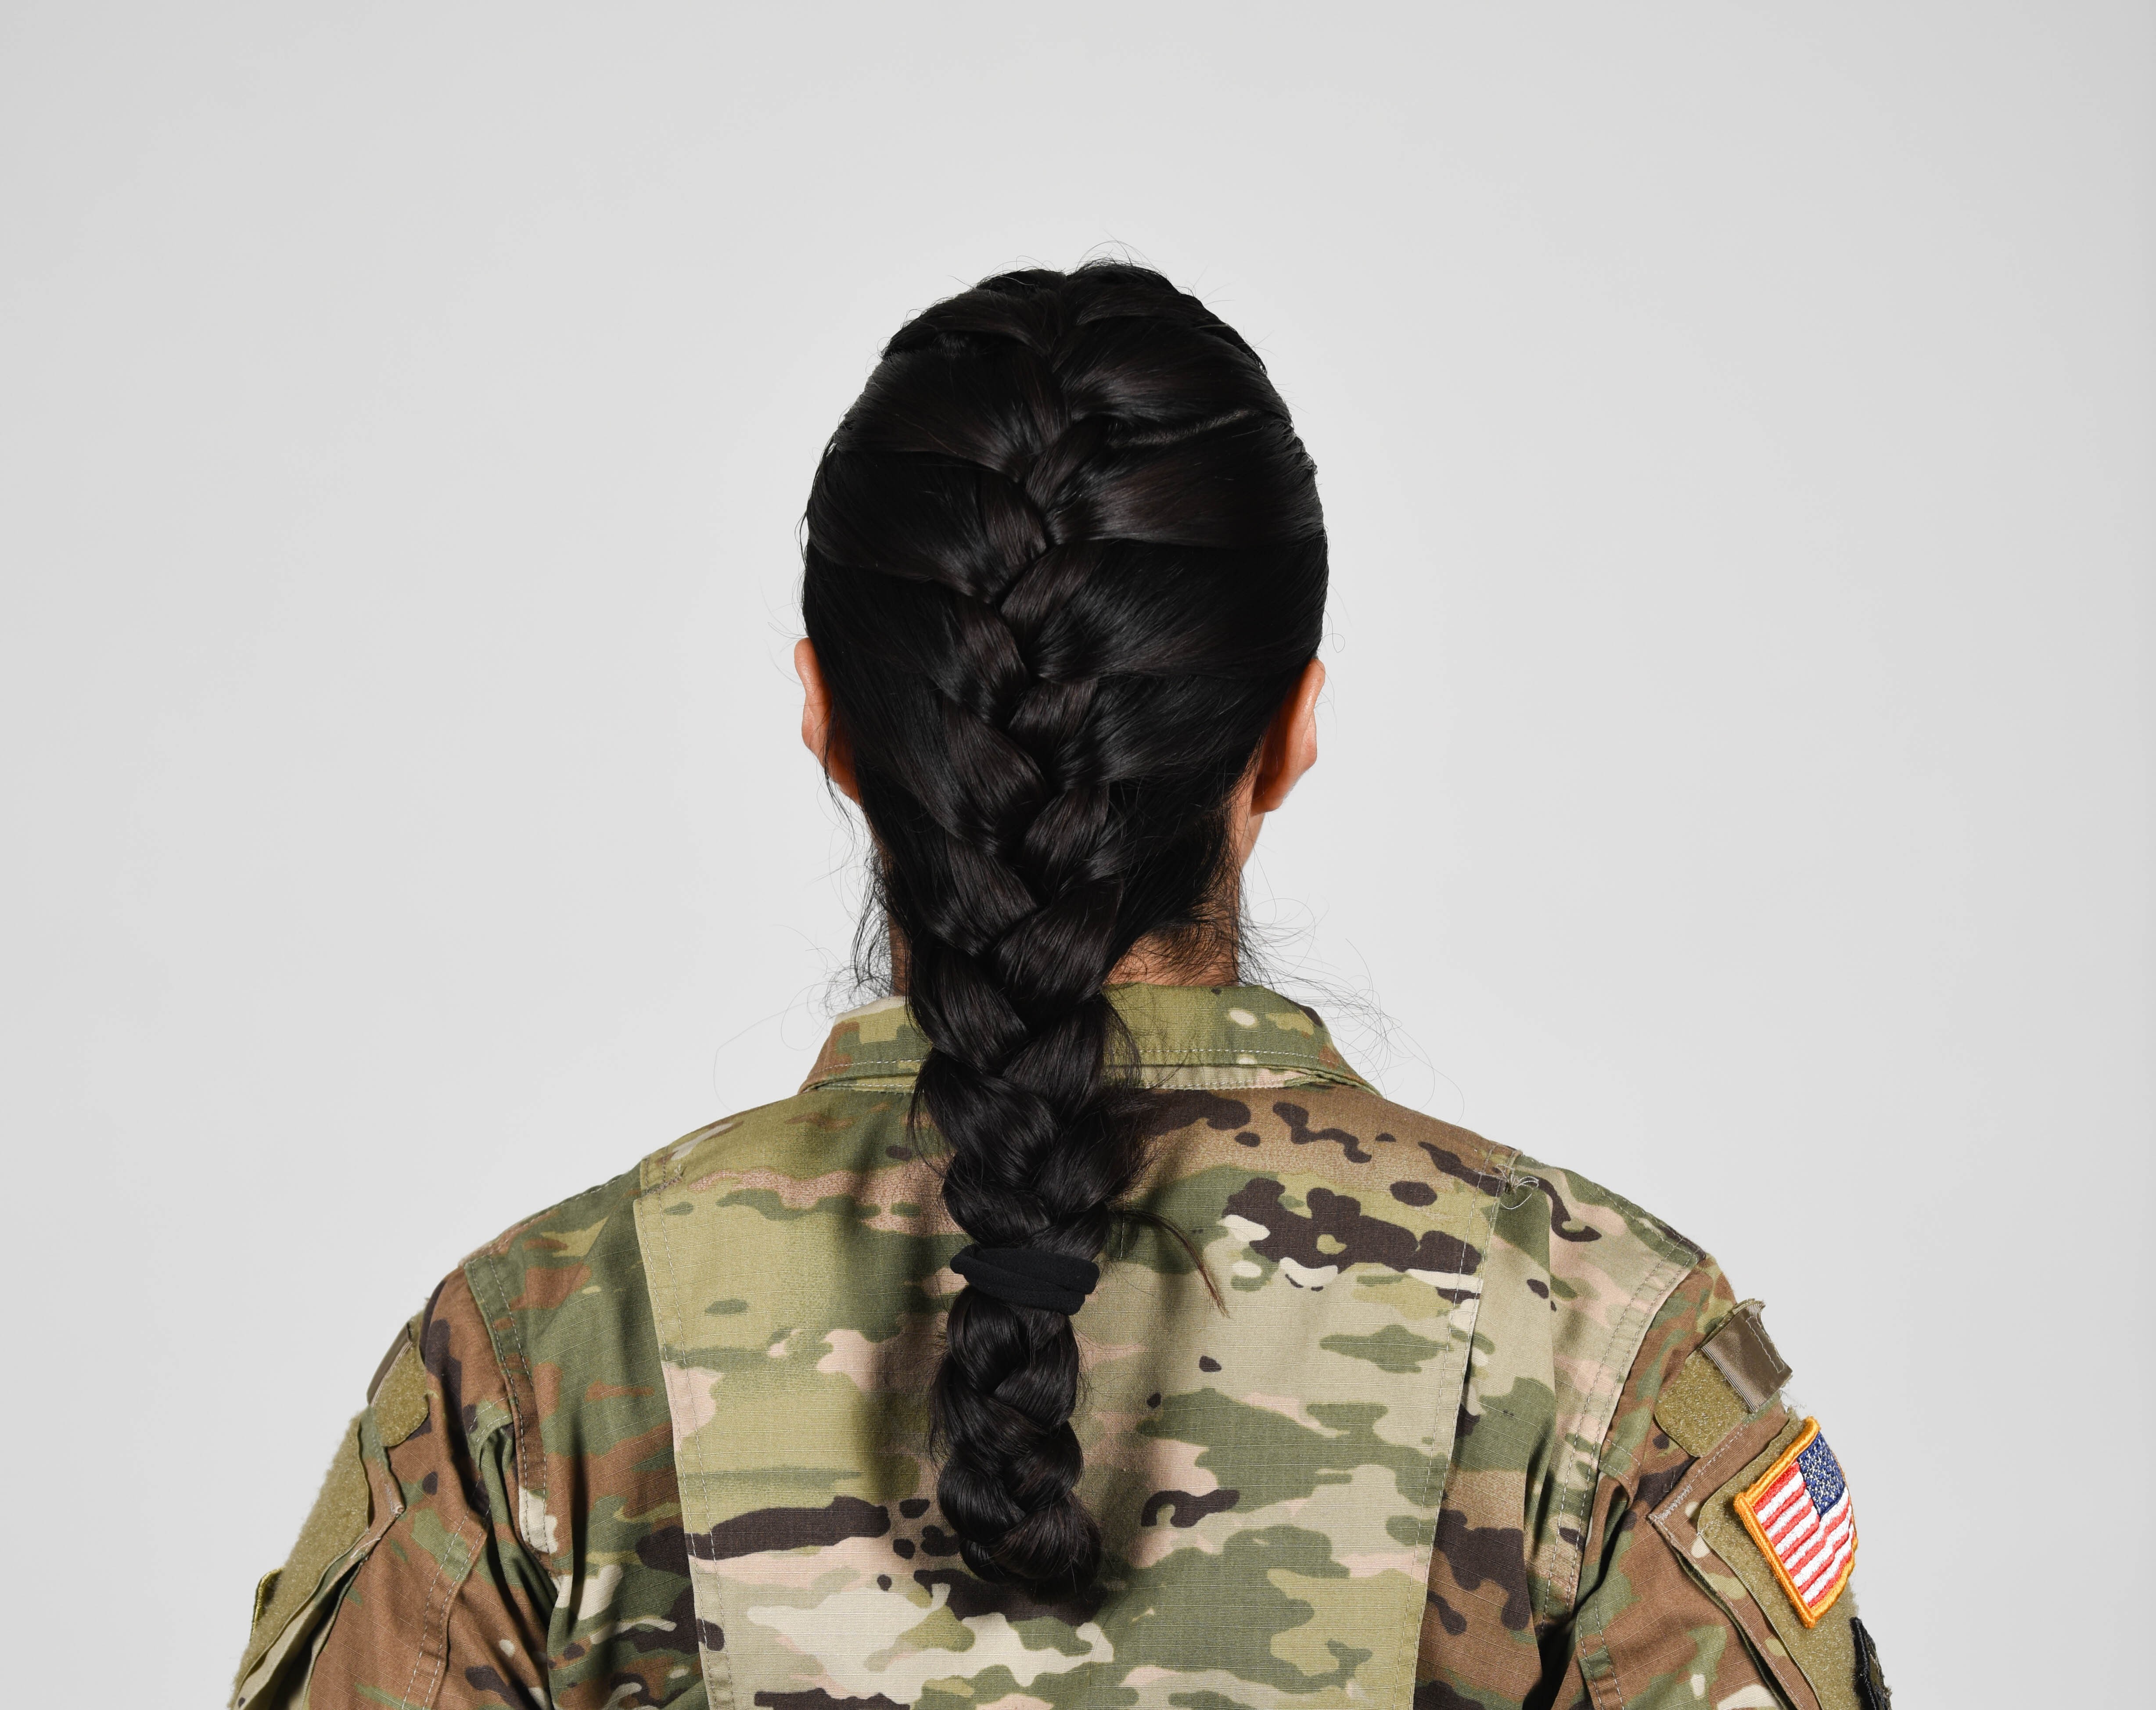 Here's where ponytails stand for women in the Marine Corps